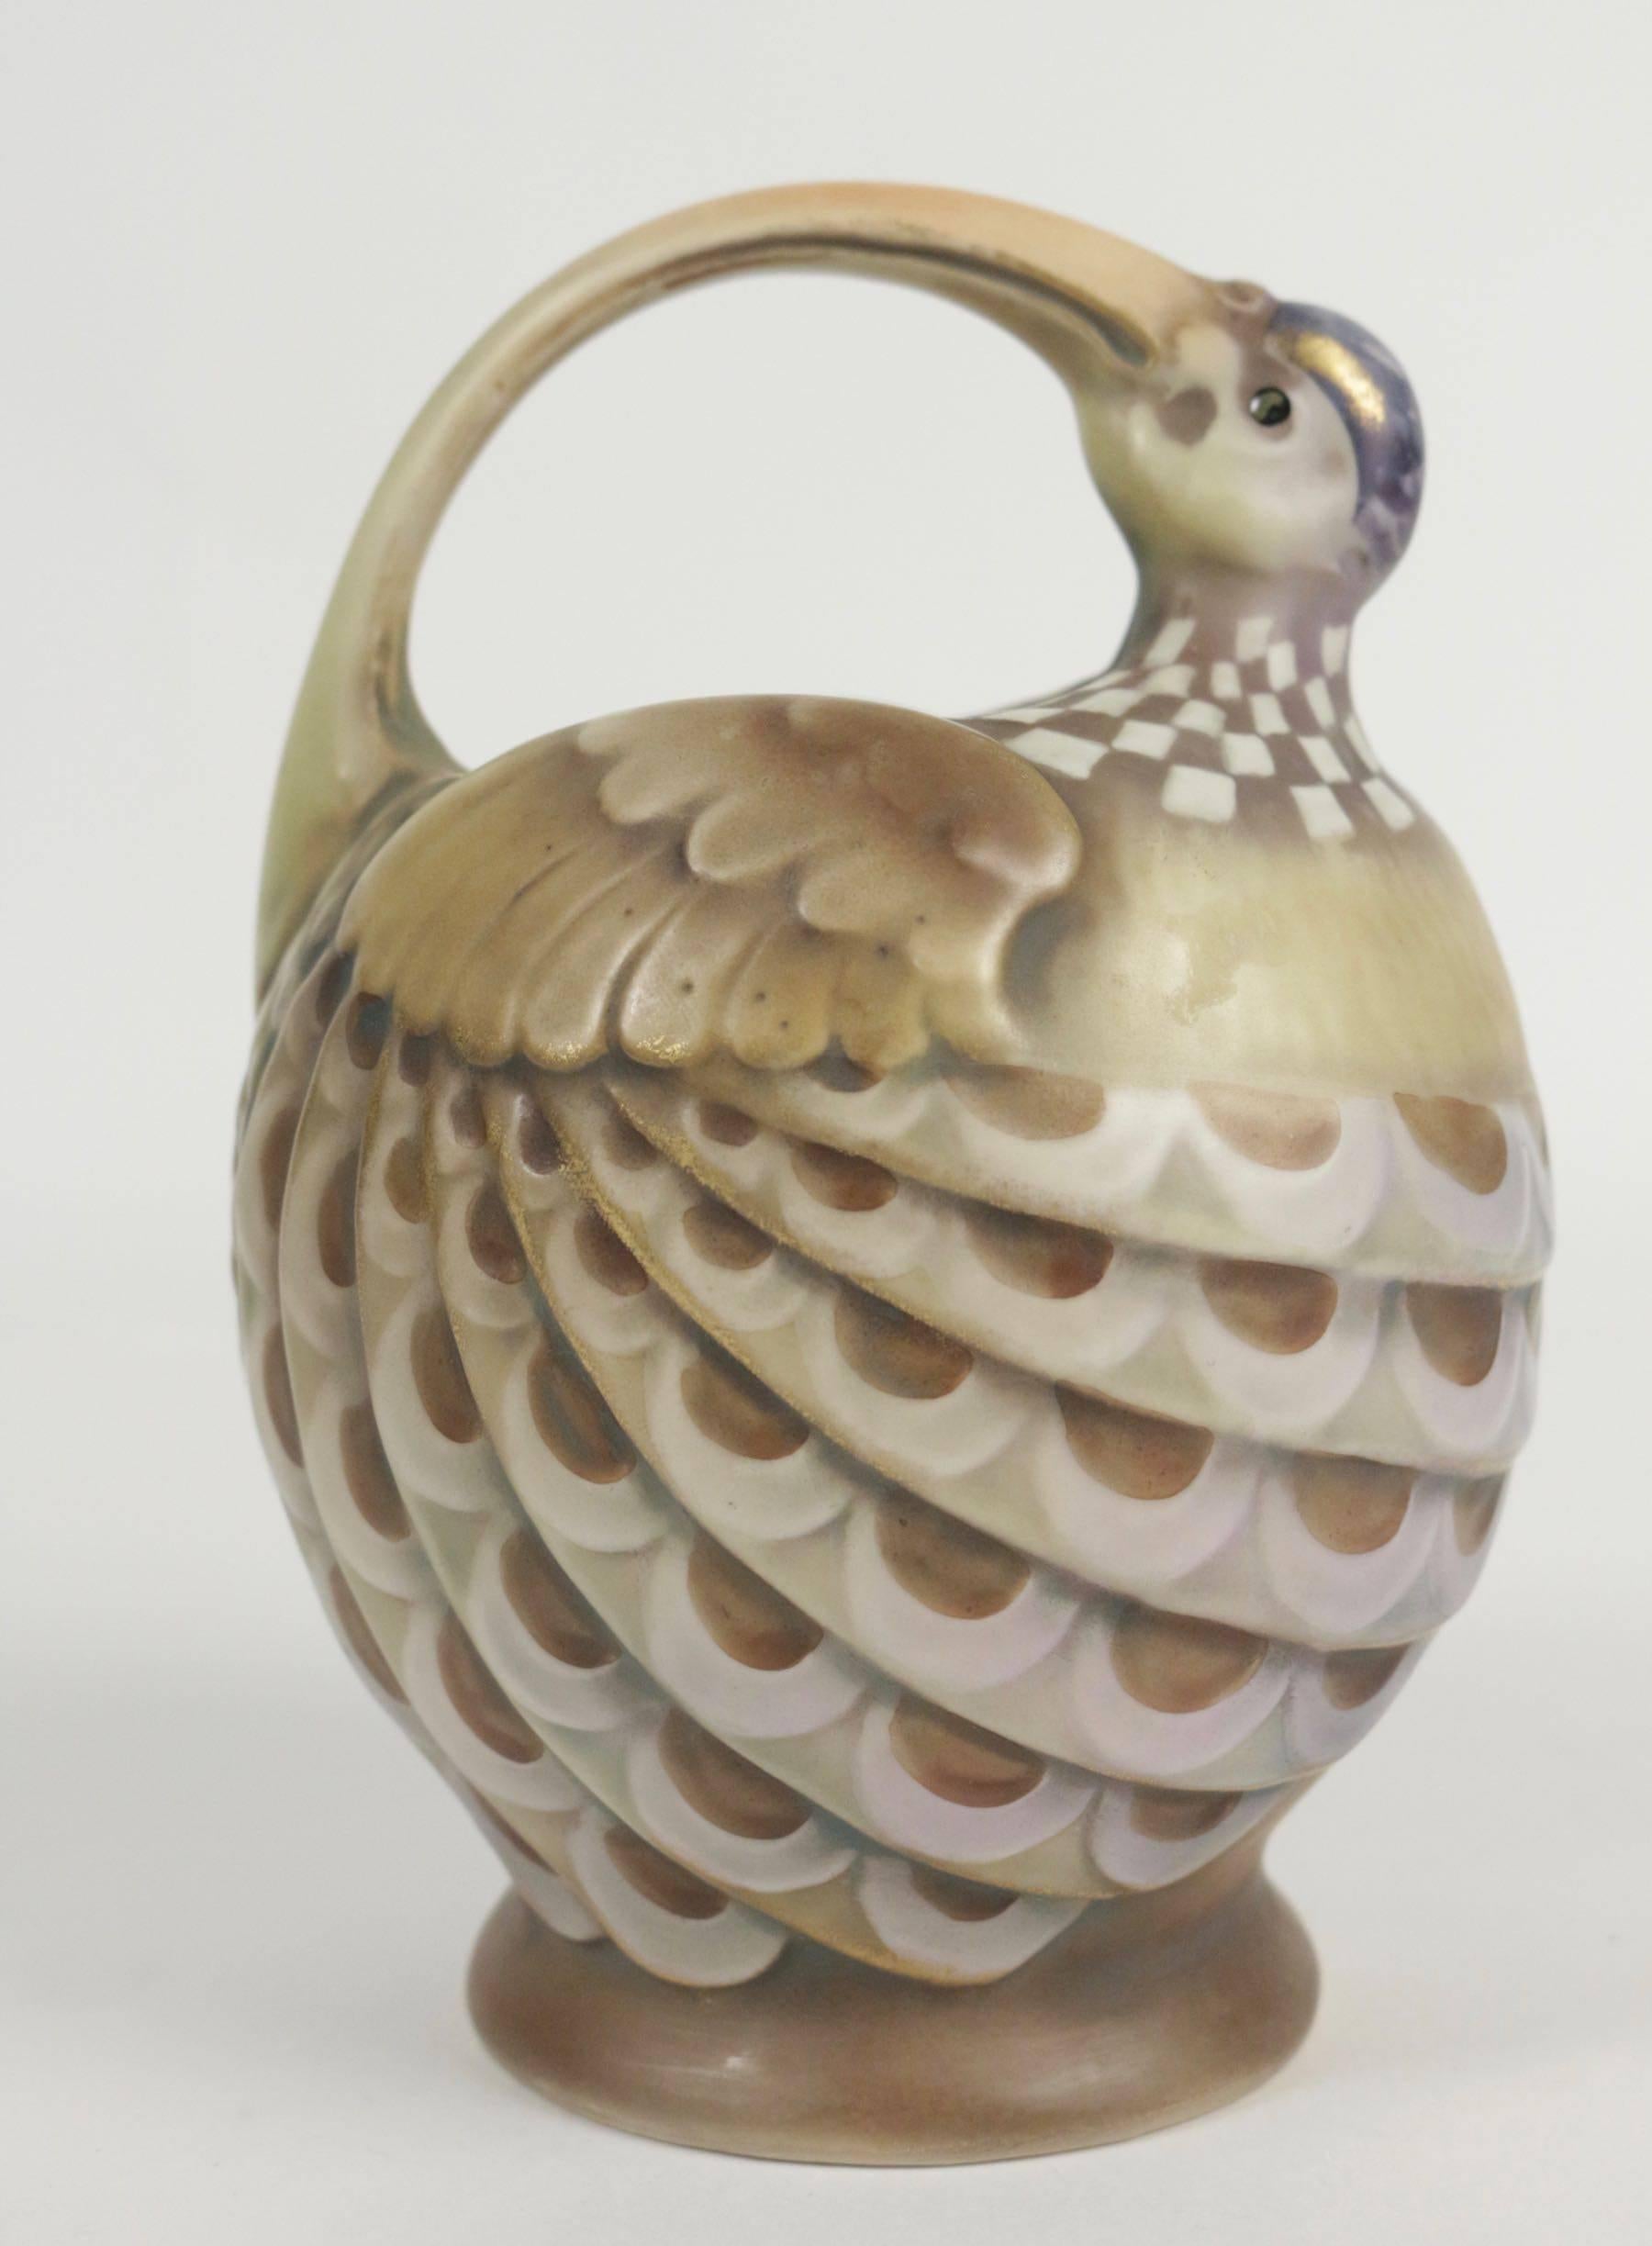 Amphora vase, Viennese, Austria in earthenware from the beginning of the 20th century, circa 1900 with a handle that transforms from a beak to head of a bird.
 